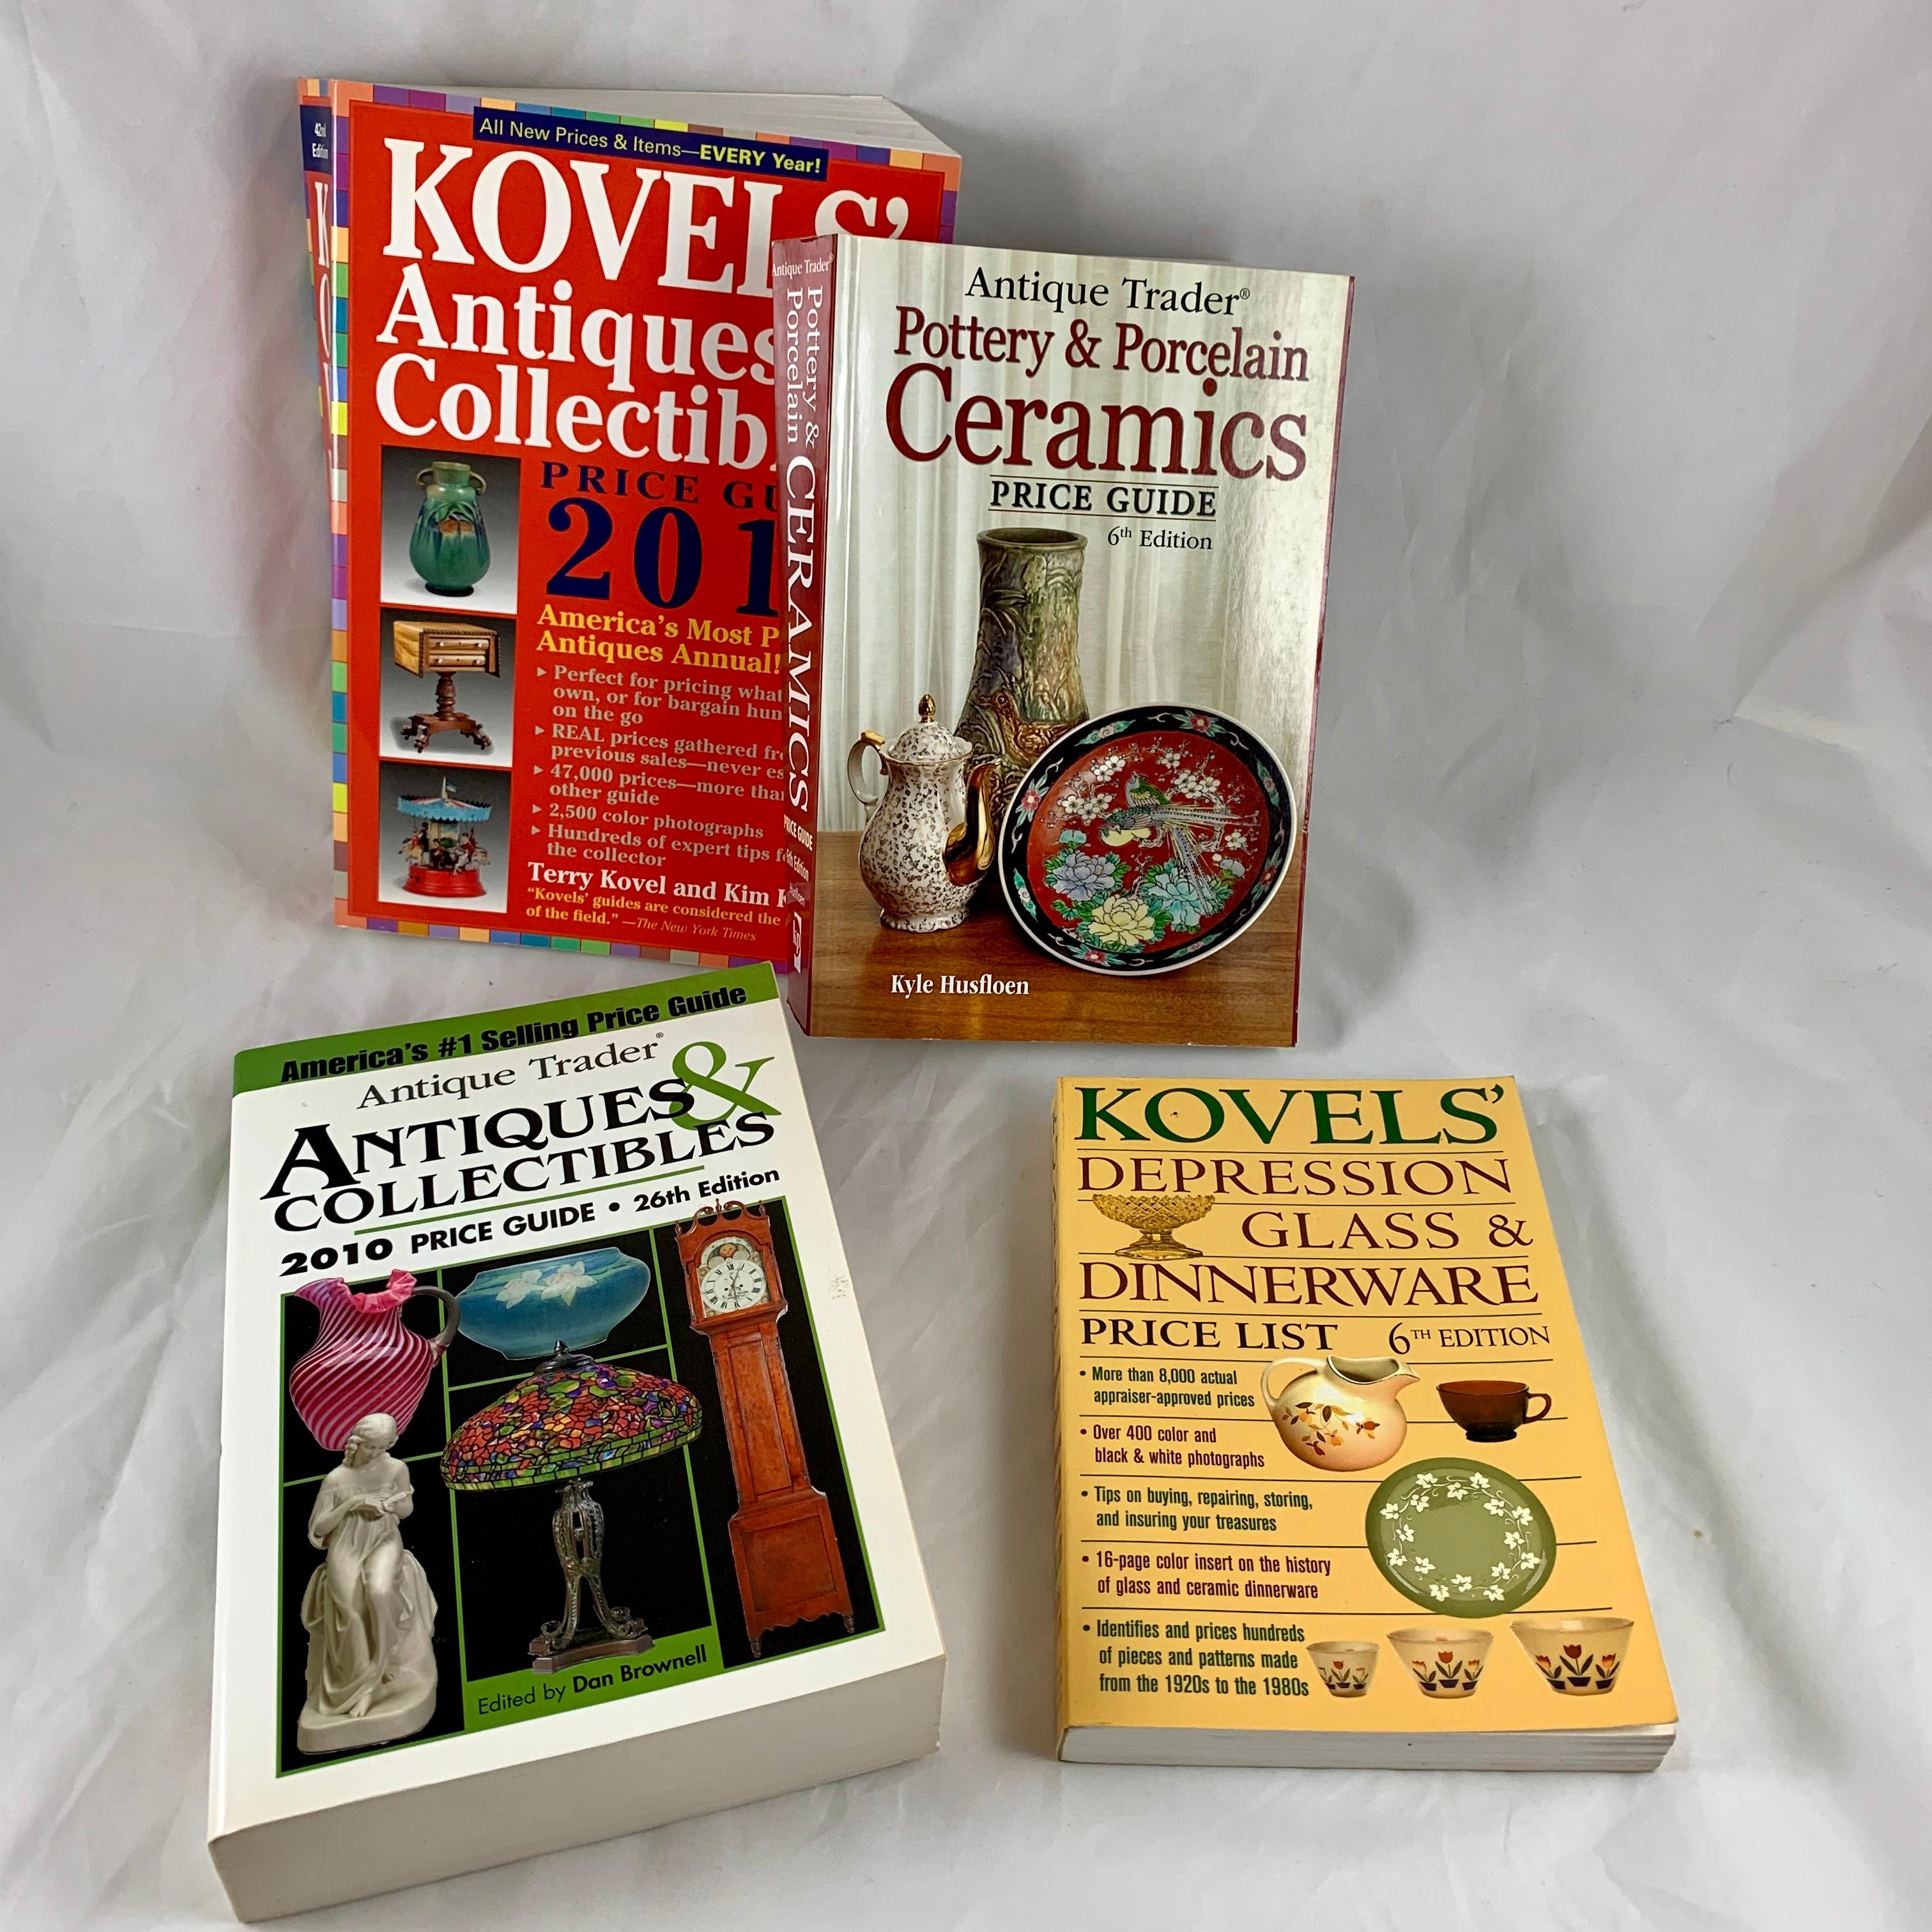 A group of four trade soft back price guides for antiques, collectibles, ceramics, pottery, and glass.
Excellent reference for both the collector and dealer.

Kovels - 2010
Antique Trader Ceramics, Pottery & Porcelain, 6th Edition
Antique